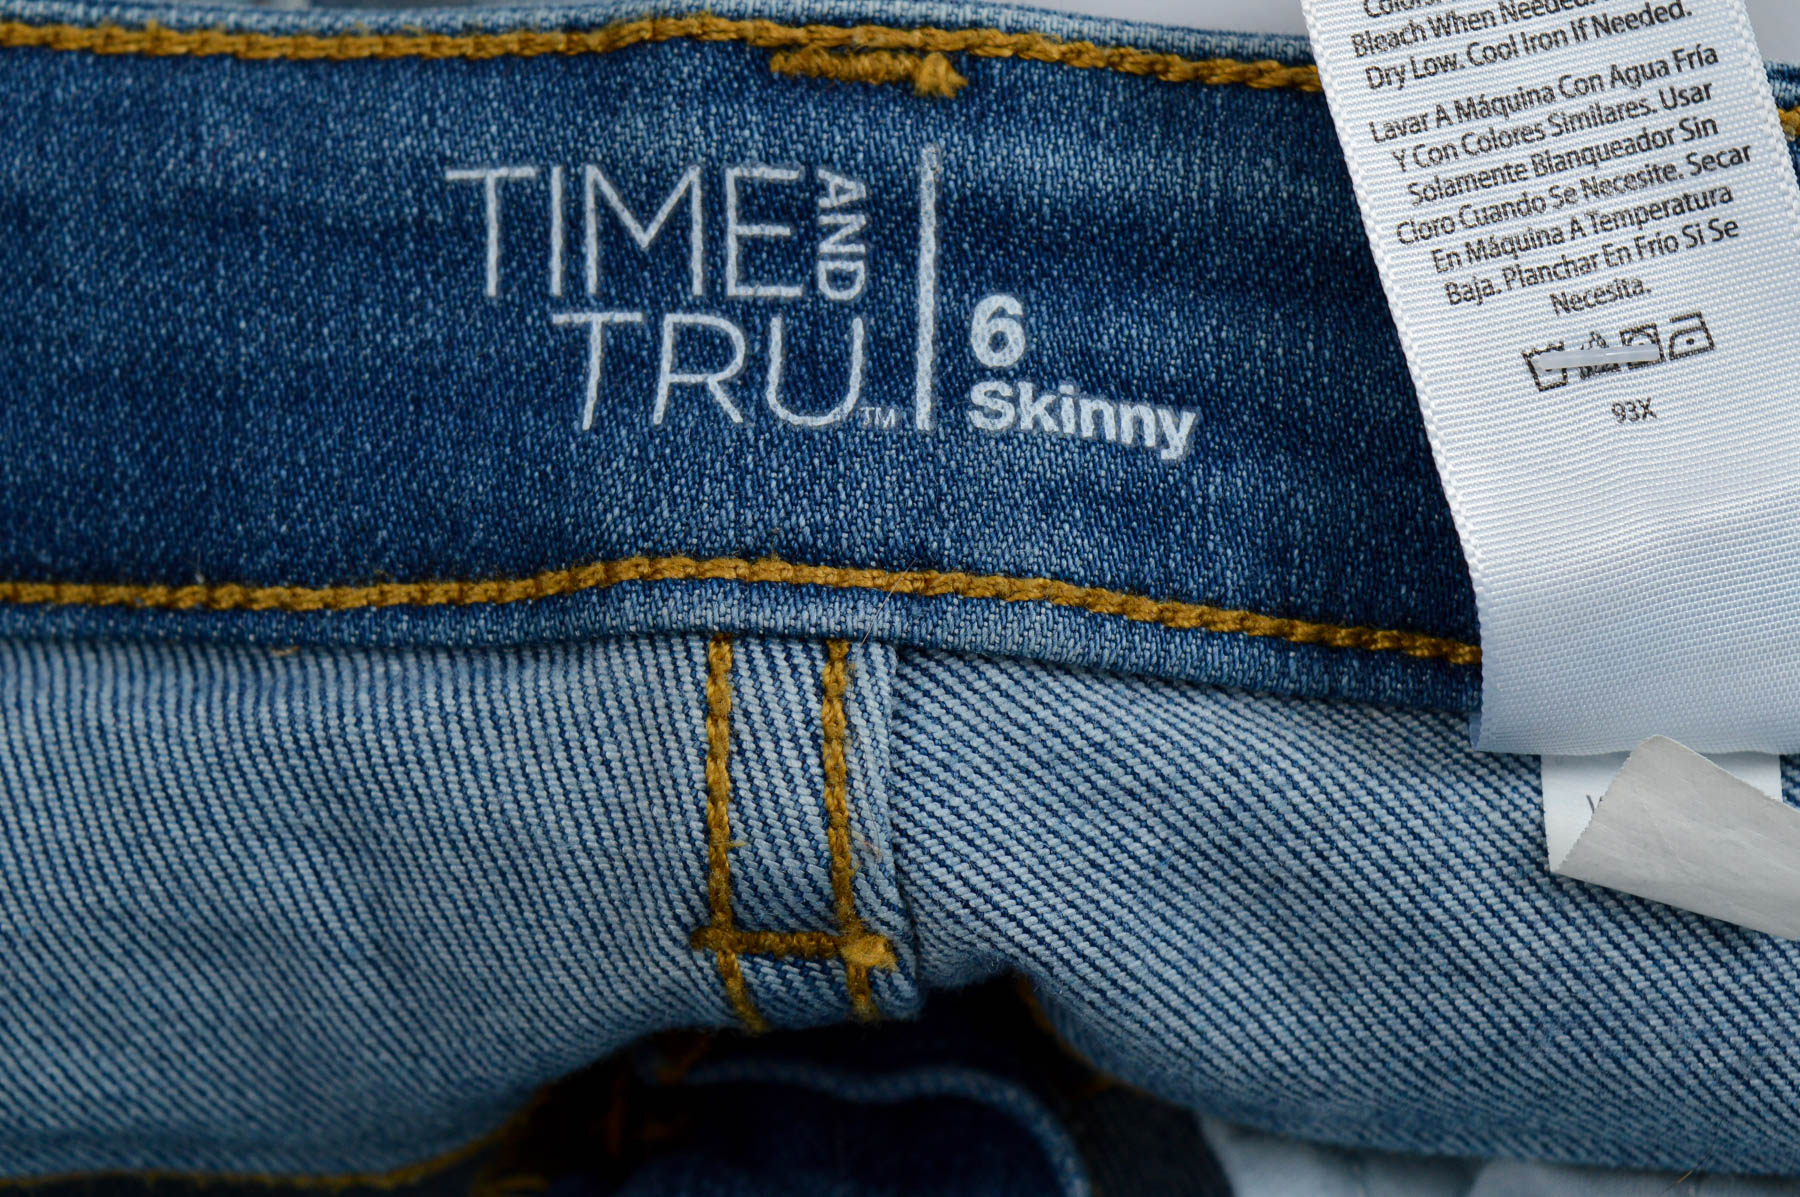 Women's jeans - TIME and TRU - 2